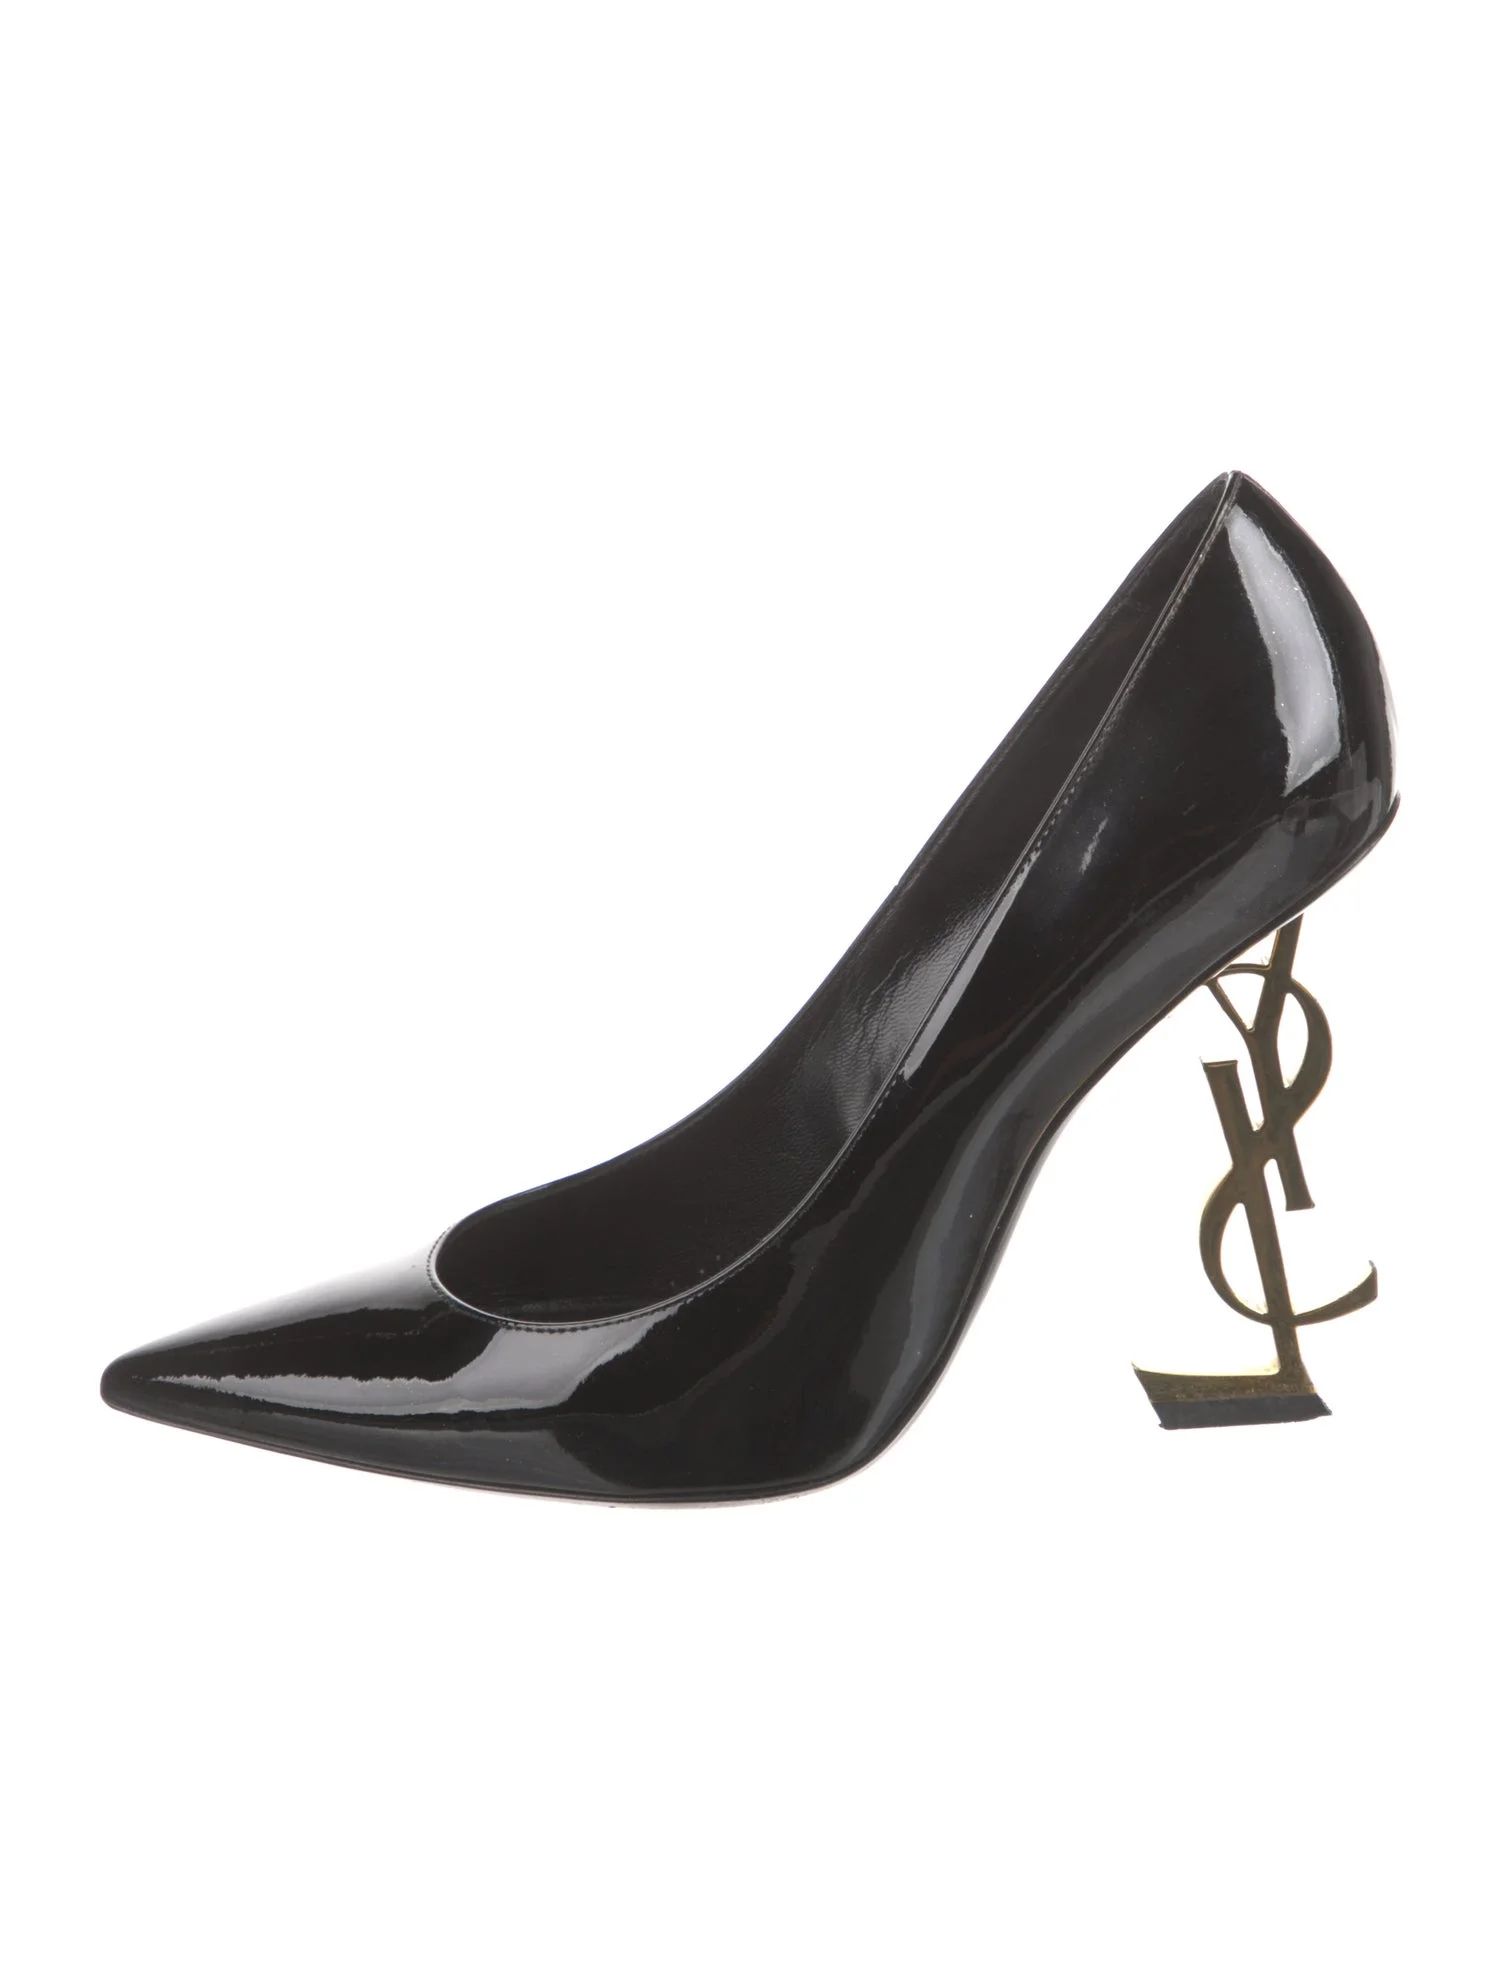 Patent Leather Pumps | The RealReal